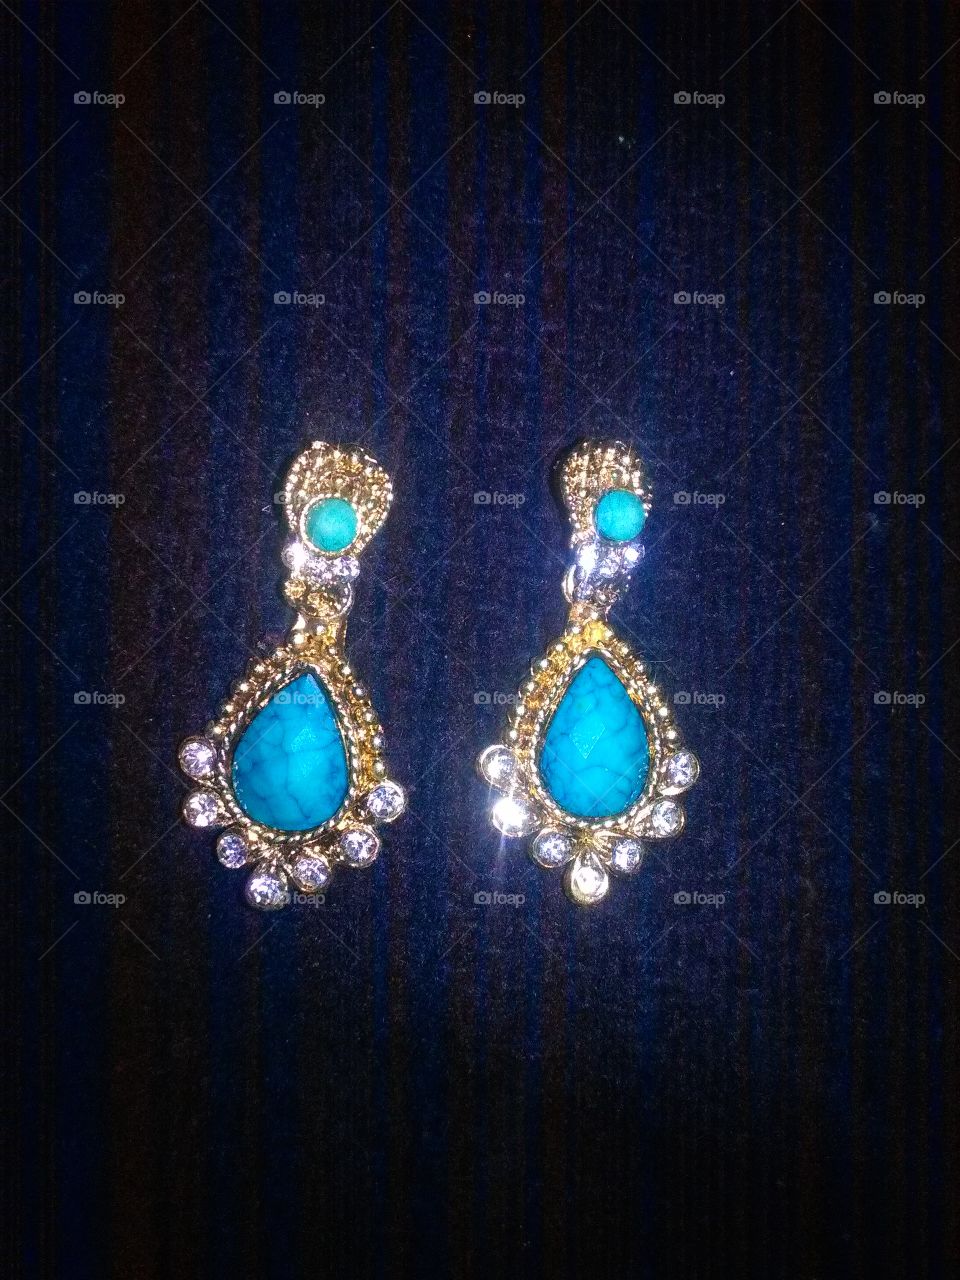 my most favorite earrings can't leave them so beautiful